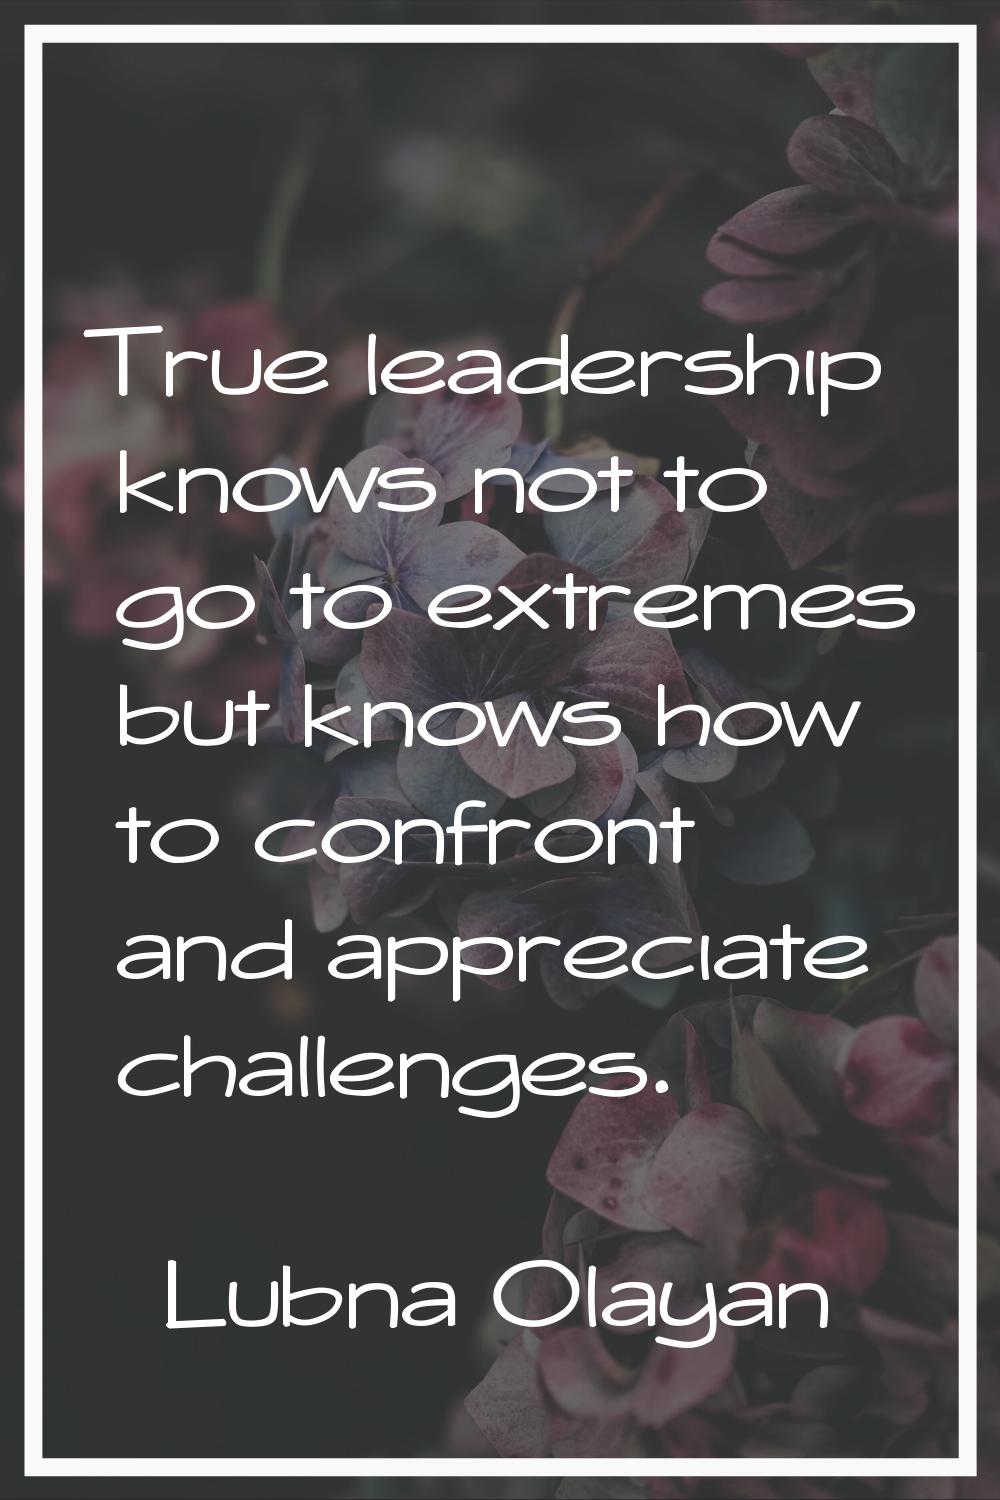 True leadership knows not to go to extremes but knows how to confront and appreciate challenges.